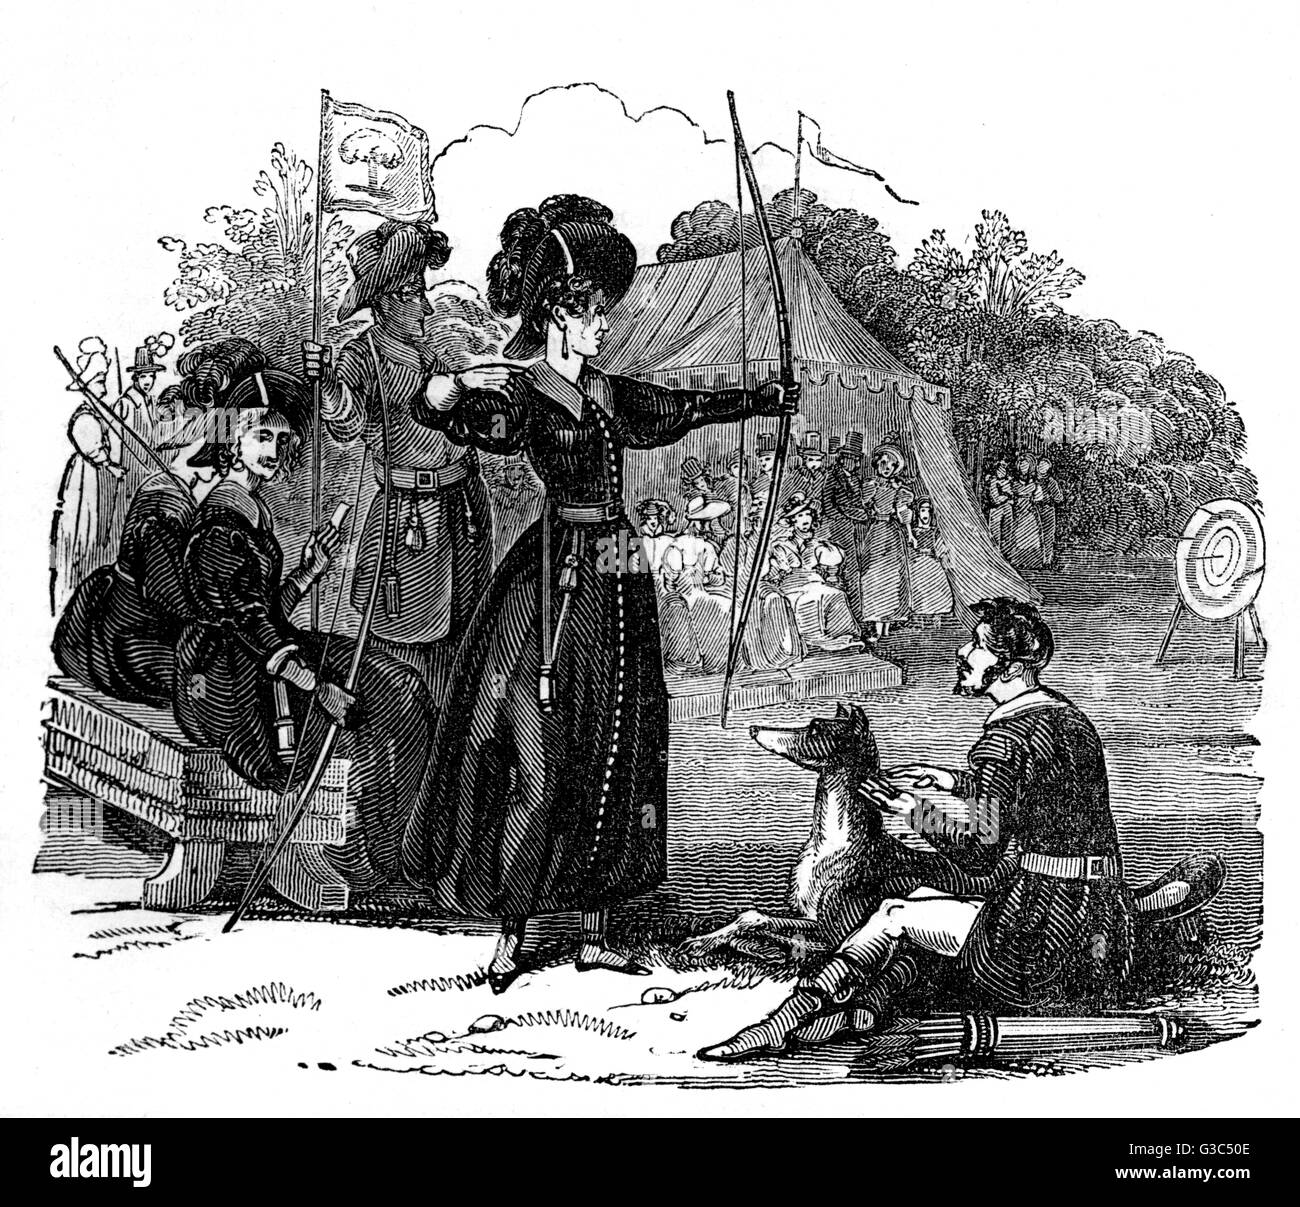 Illustration, scene at an archery event Stock Photo